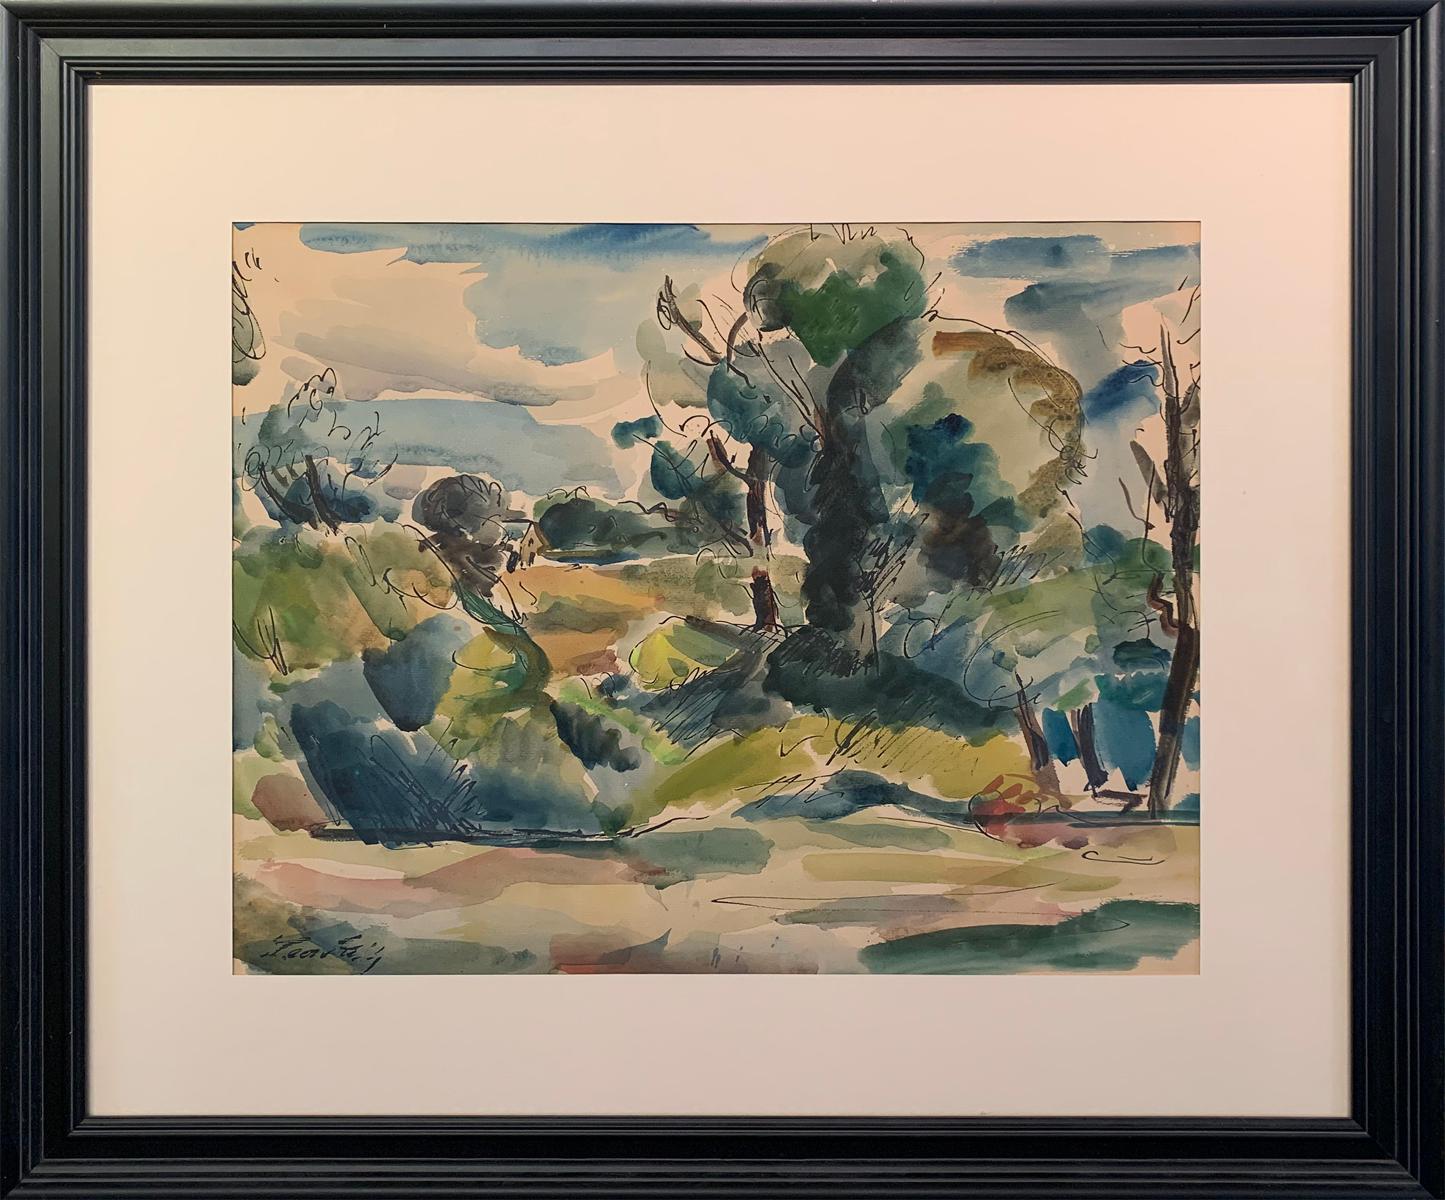 "Landscape" is a 17.5" x 23.5" modern landscape, watercolor and ink on paper by surrealist painter Leon Kelly. The painting is signed on the lower left "Leon Kelly". The artwork comes from the Earl Horter Estate. The painting is matted and framed.